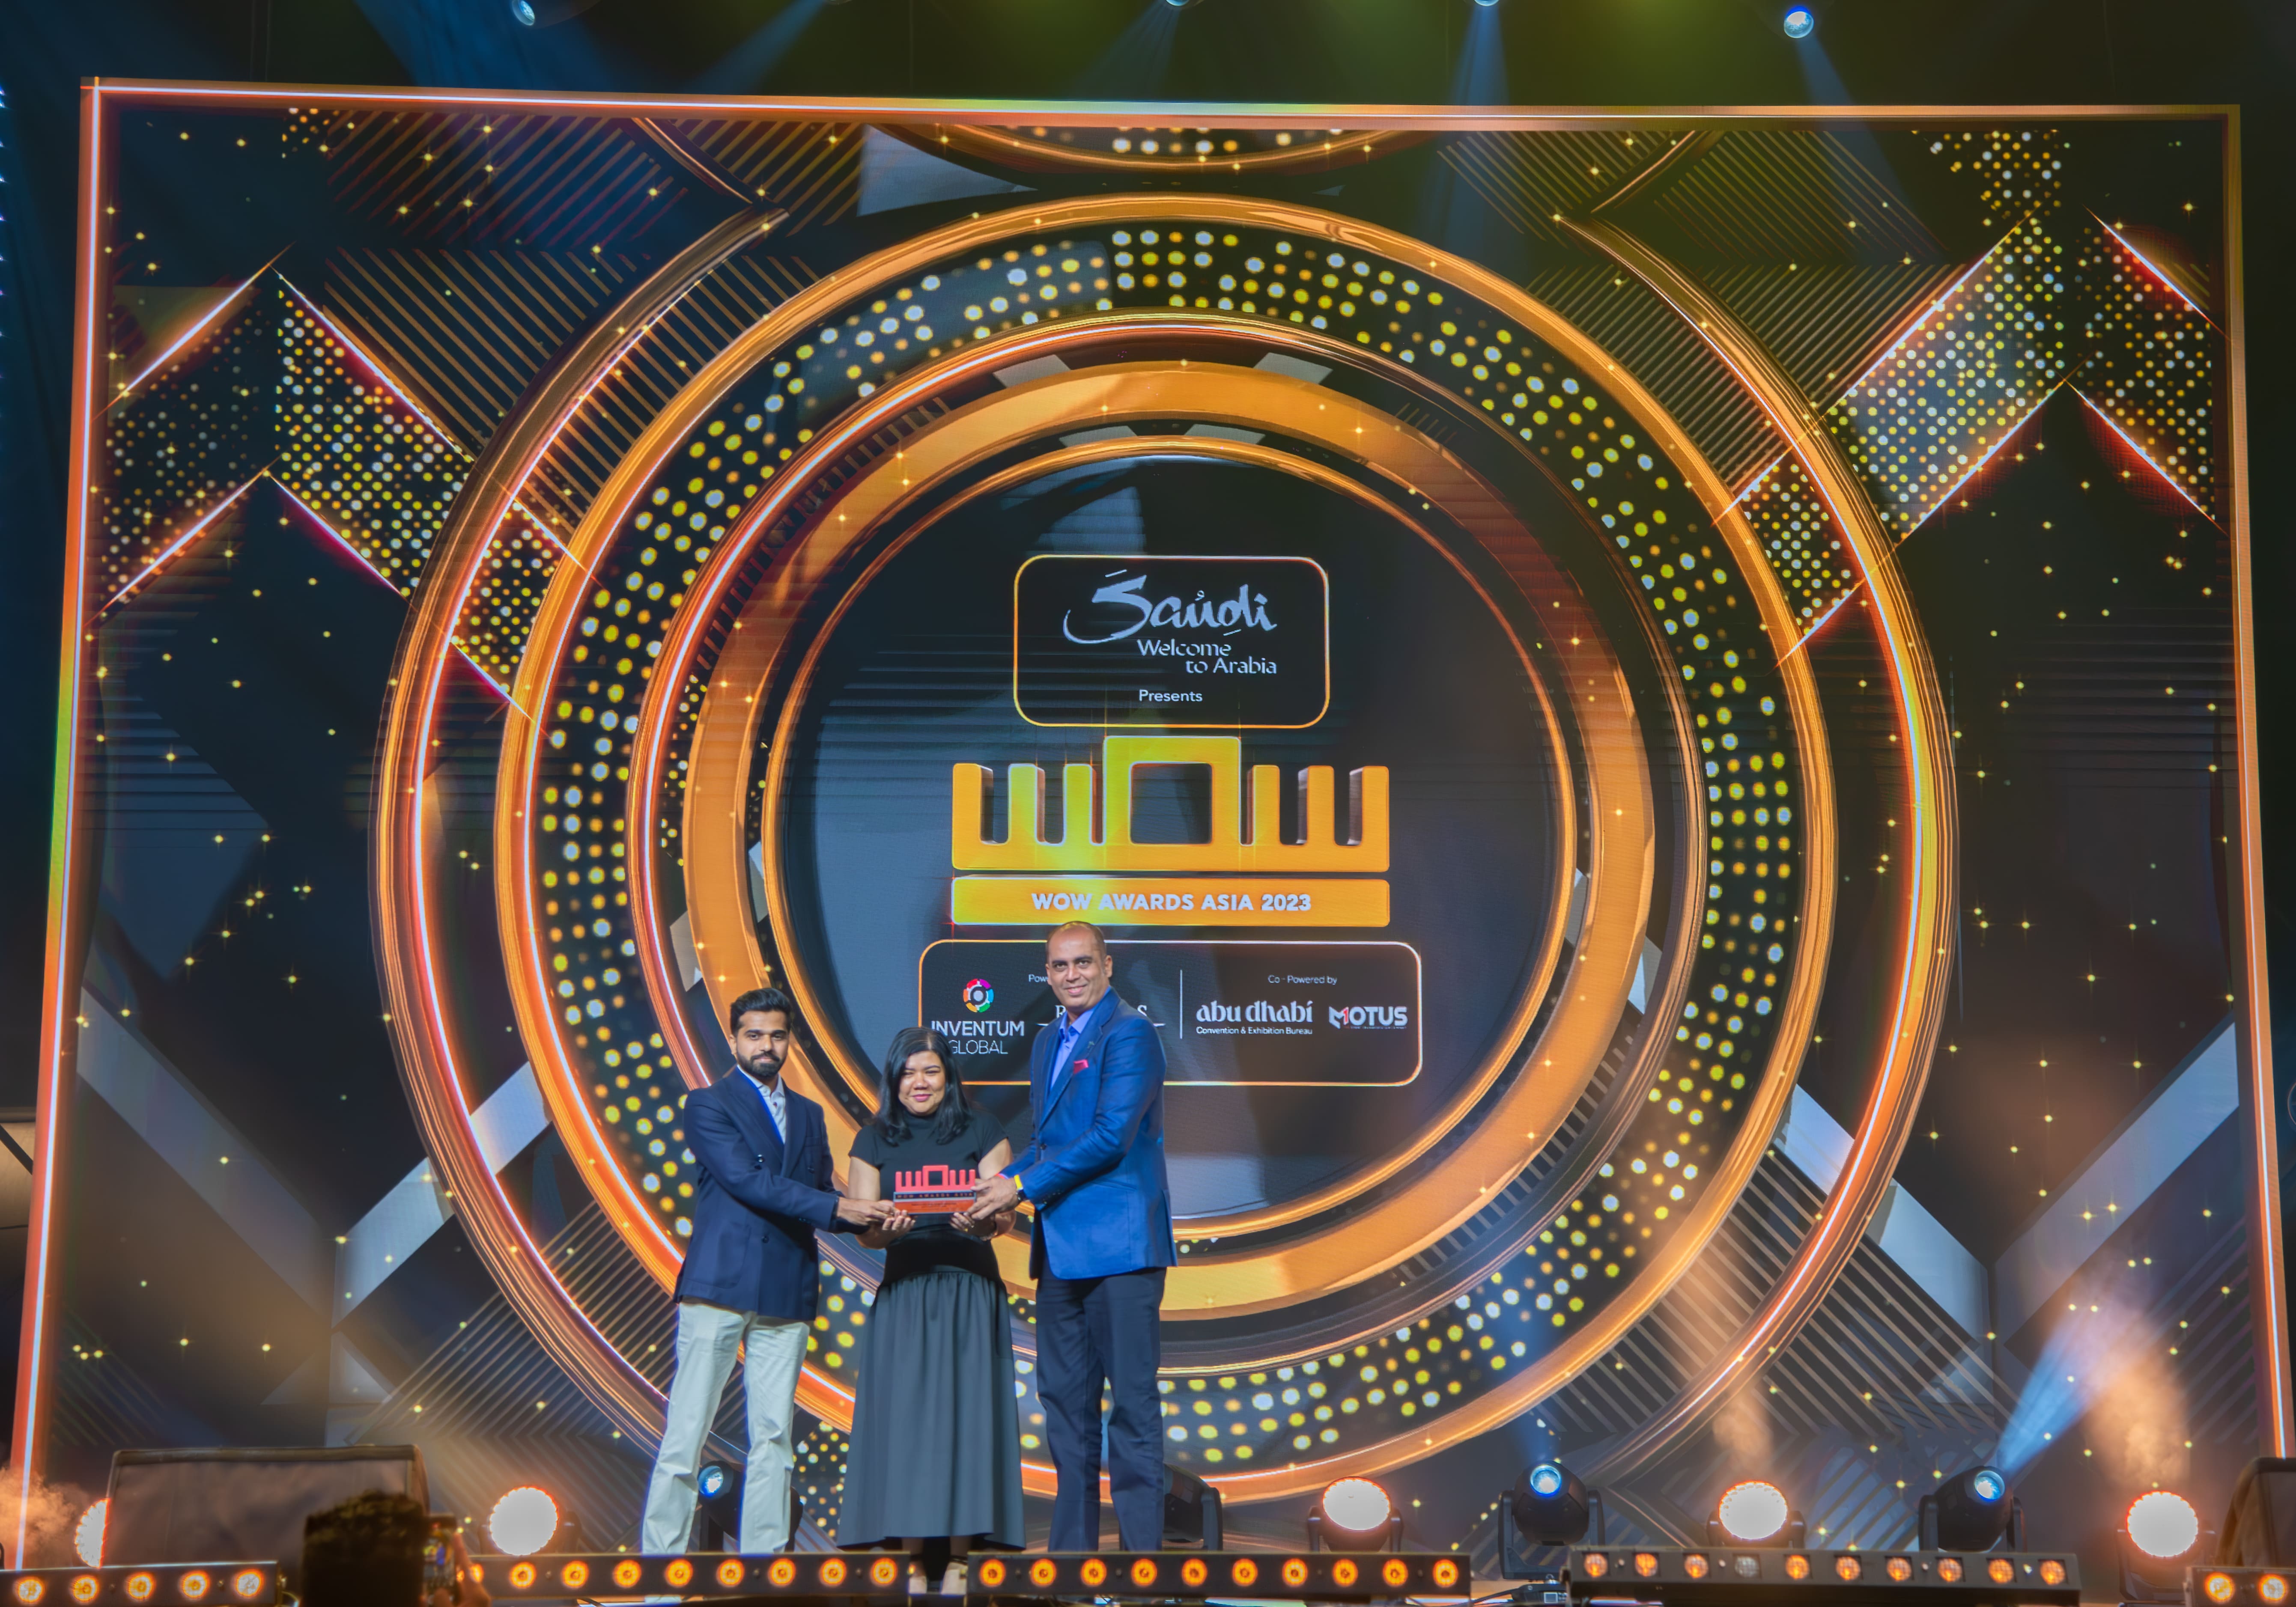 Saudi Motorsport Company Wins “Best F1 Event in the Region” at WOW Awards Asia 2023